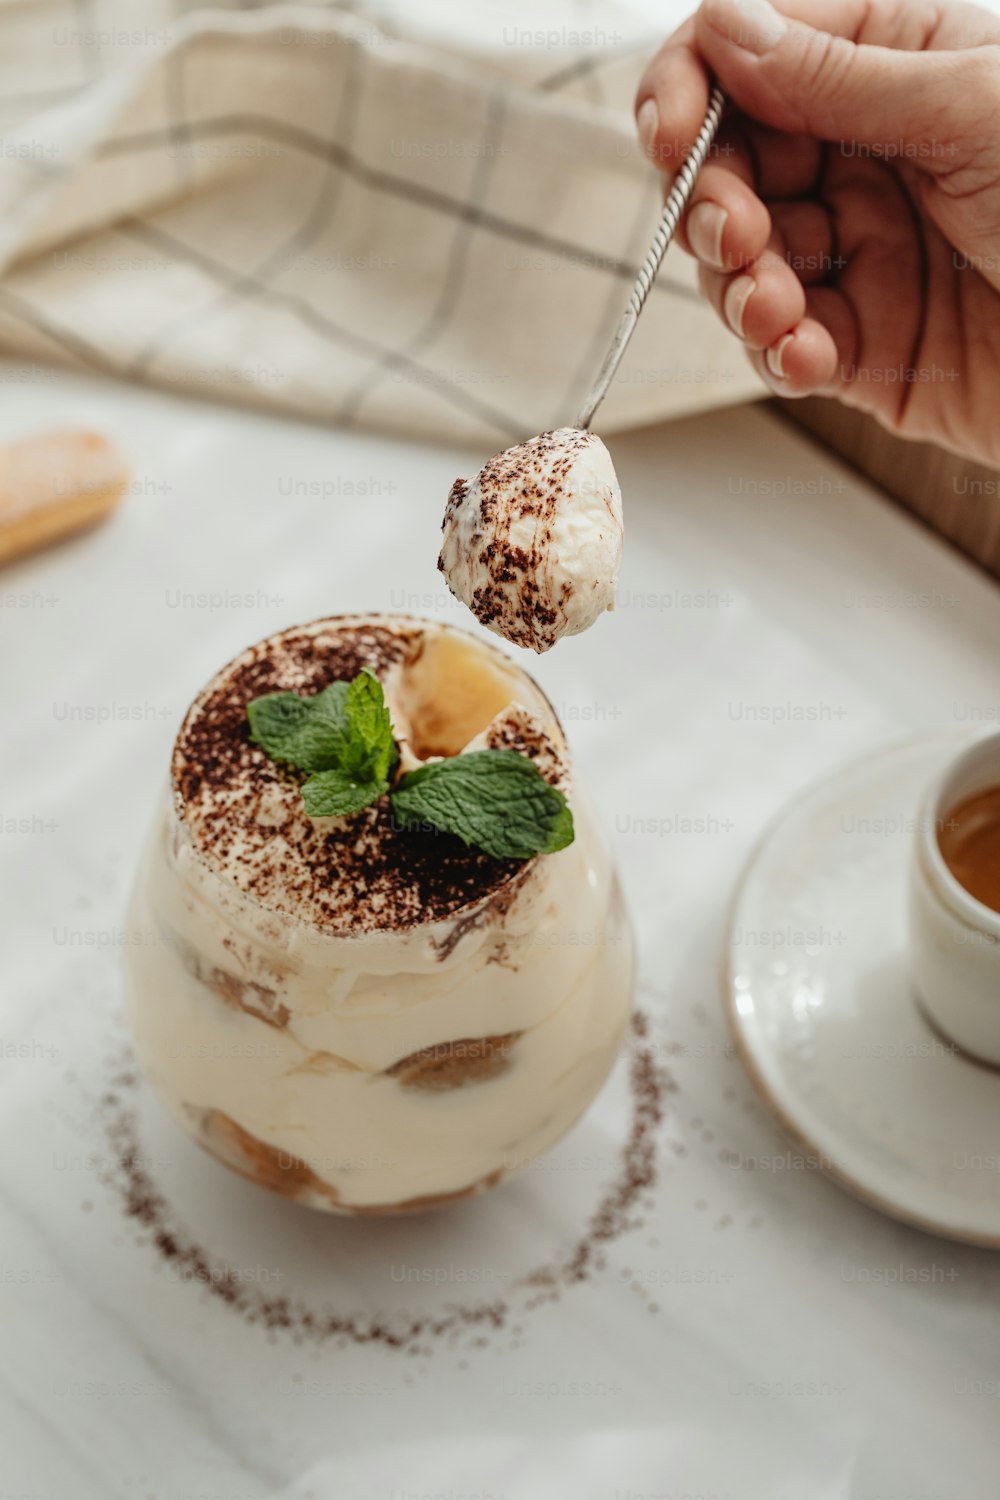 a person holding a spoon with a dessert on it